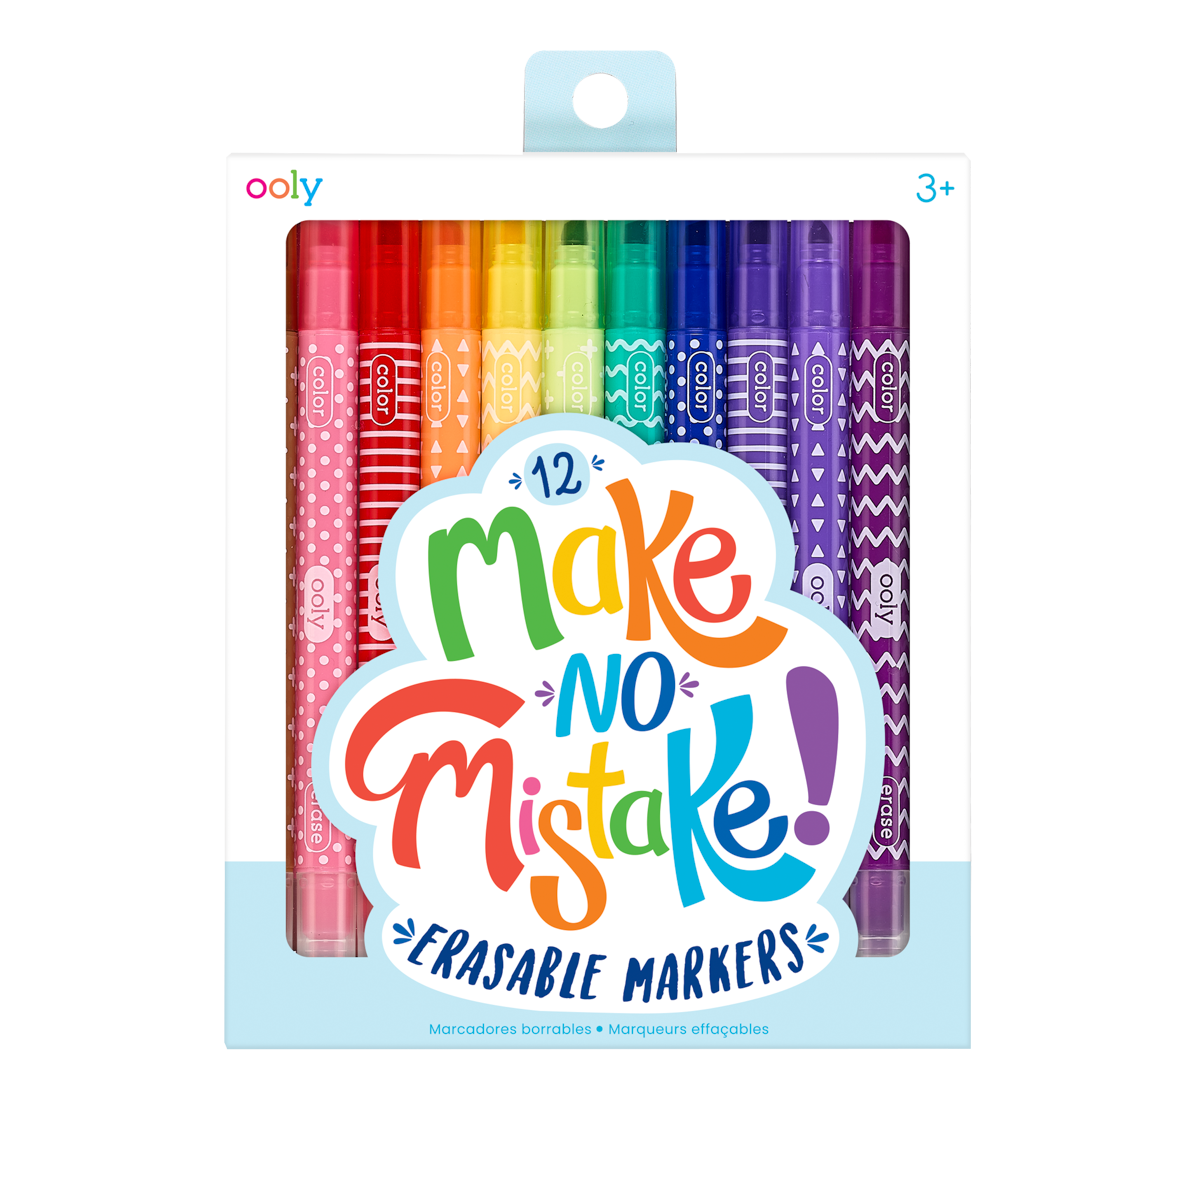 Ooly The Ink Works Markers (Set of 5)